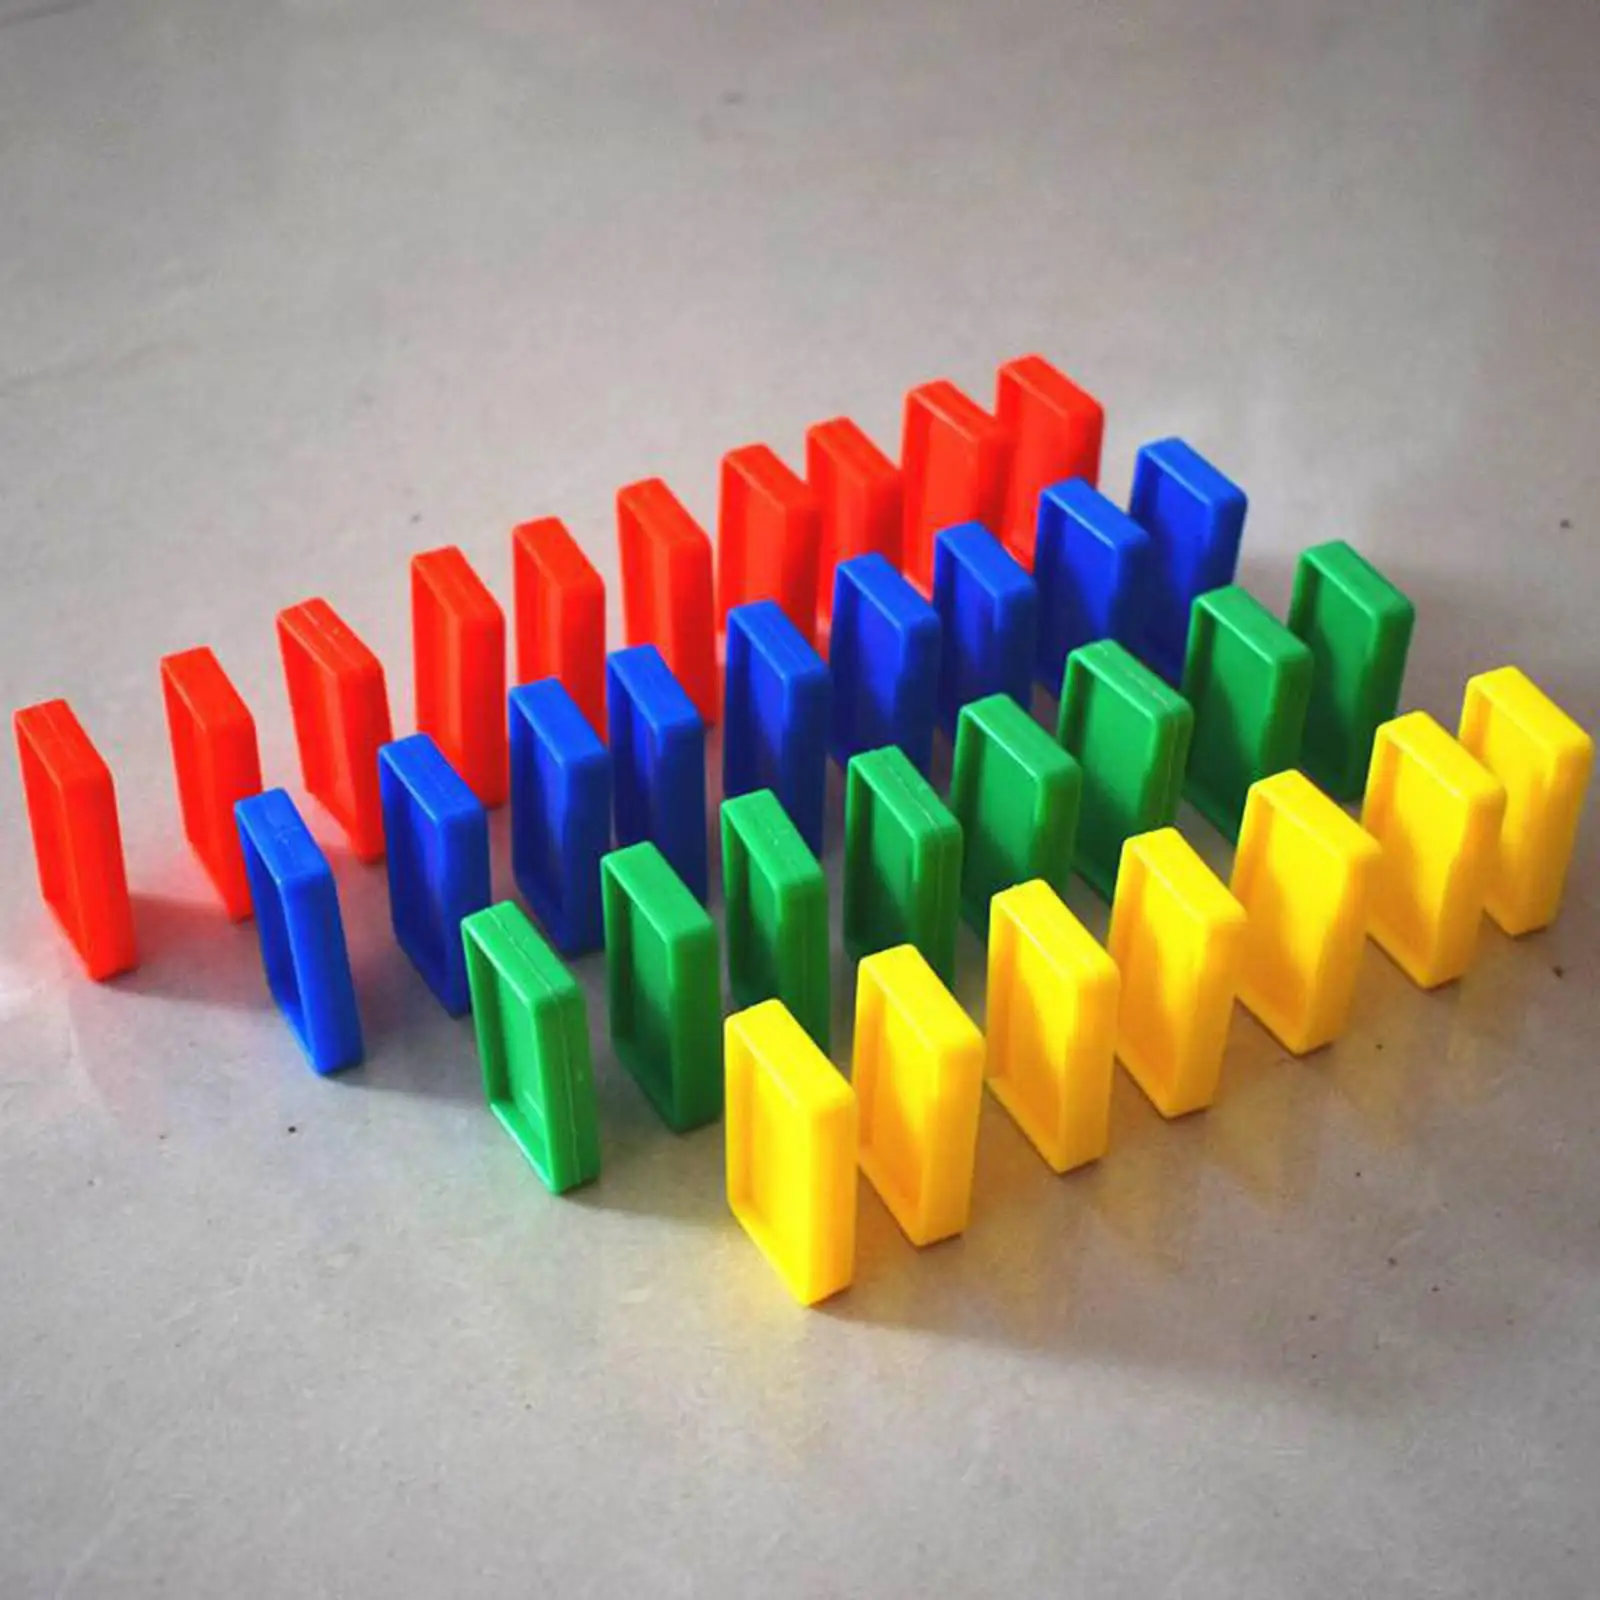 100 Pieces Colorful Dominoes Blocks Educational Play Toy Family Games Game Stacking Toy for Toddler Kids Birthday Gifts